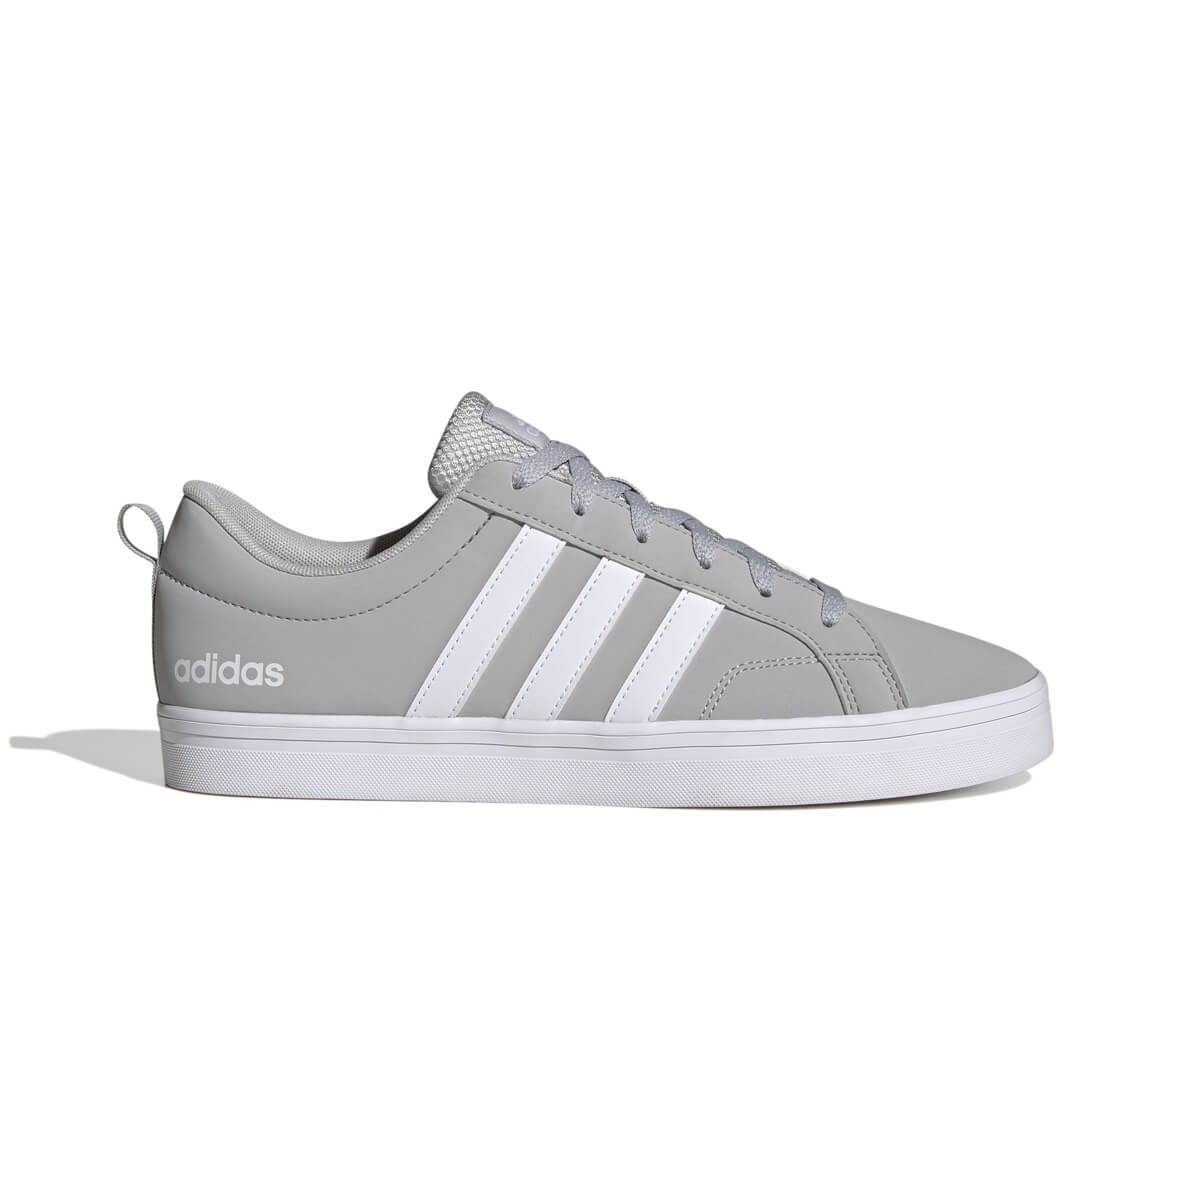 adidas VS Pace 2.0 Skateboarding Shoes HP6006